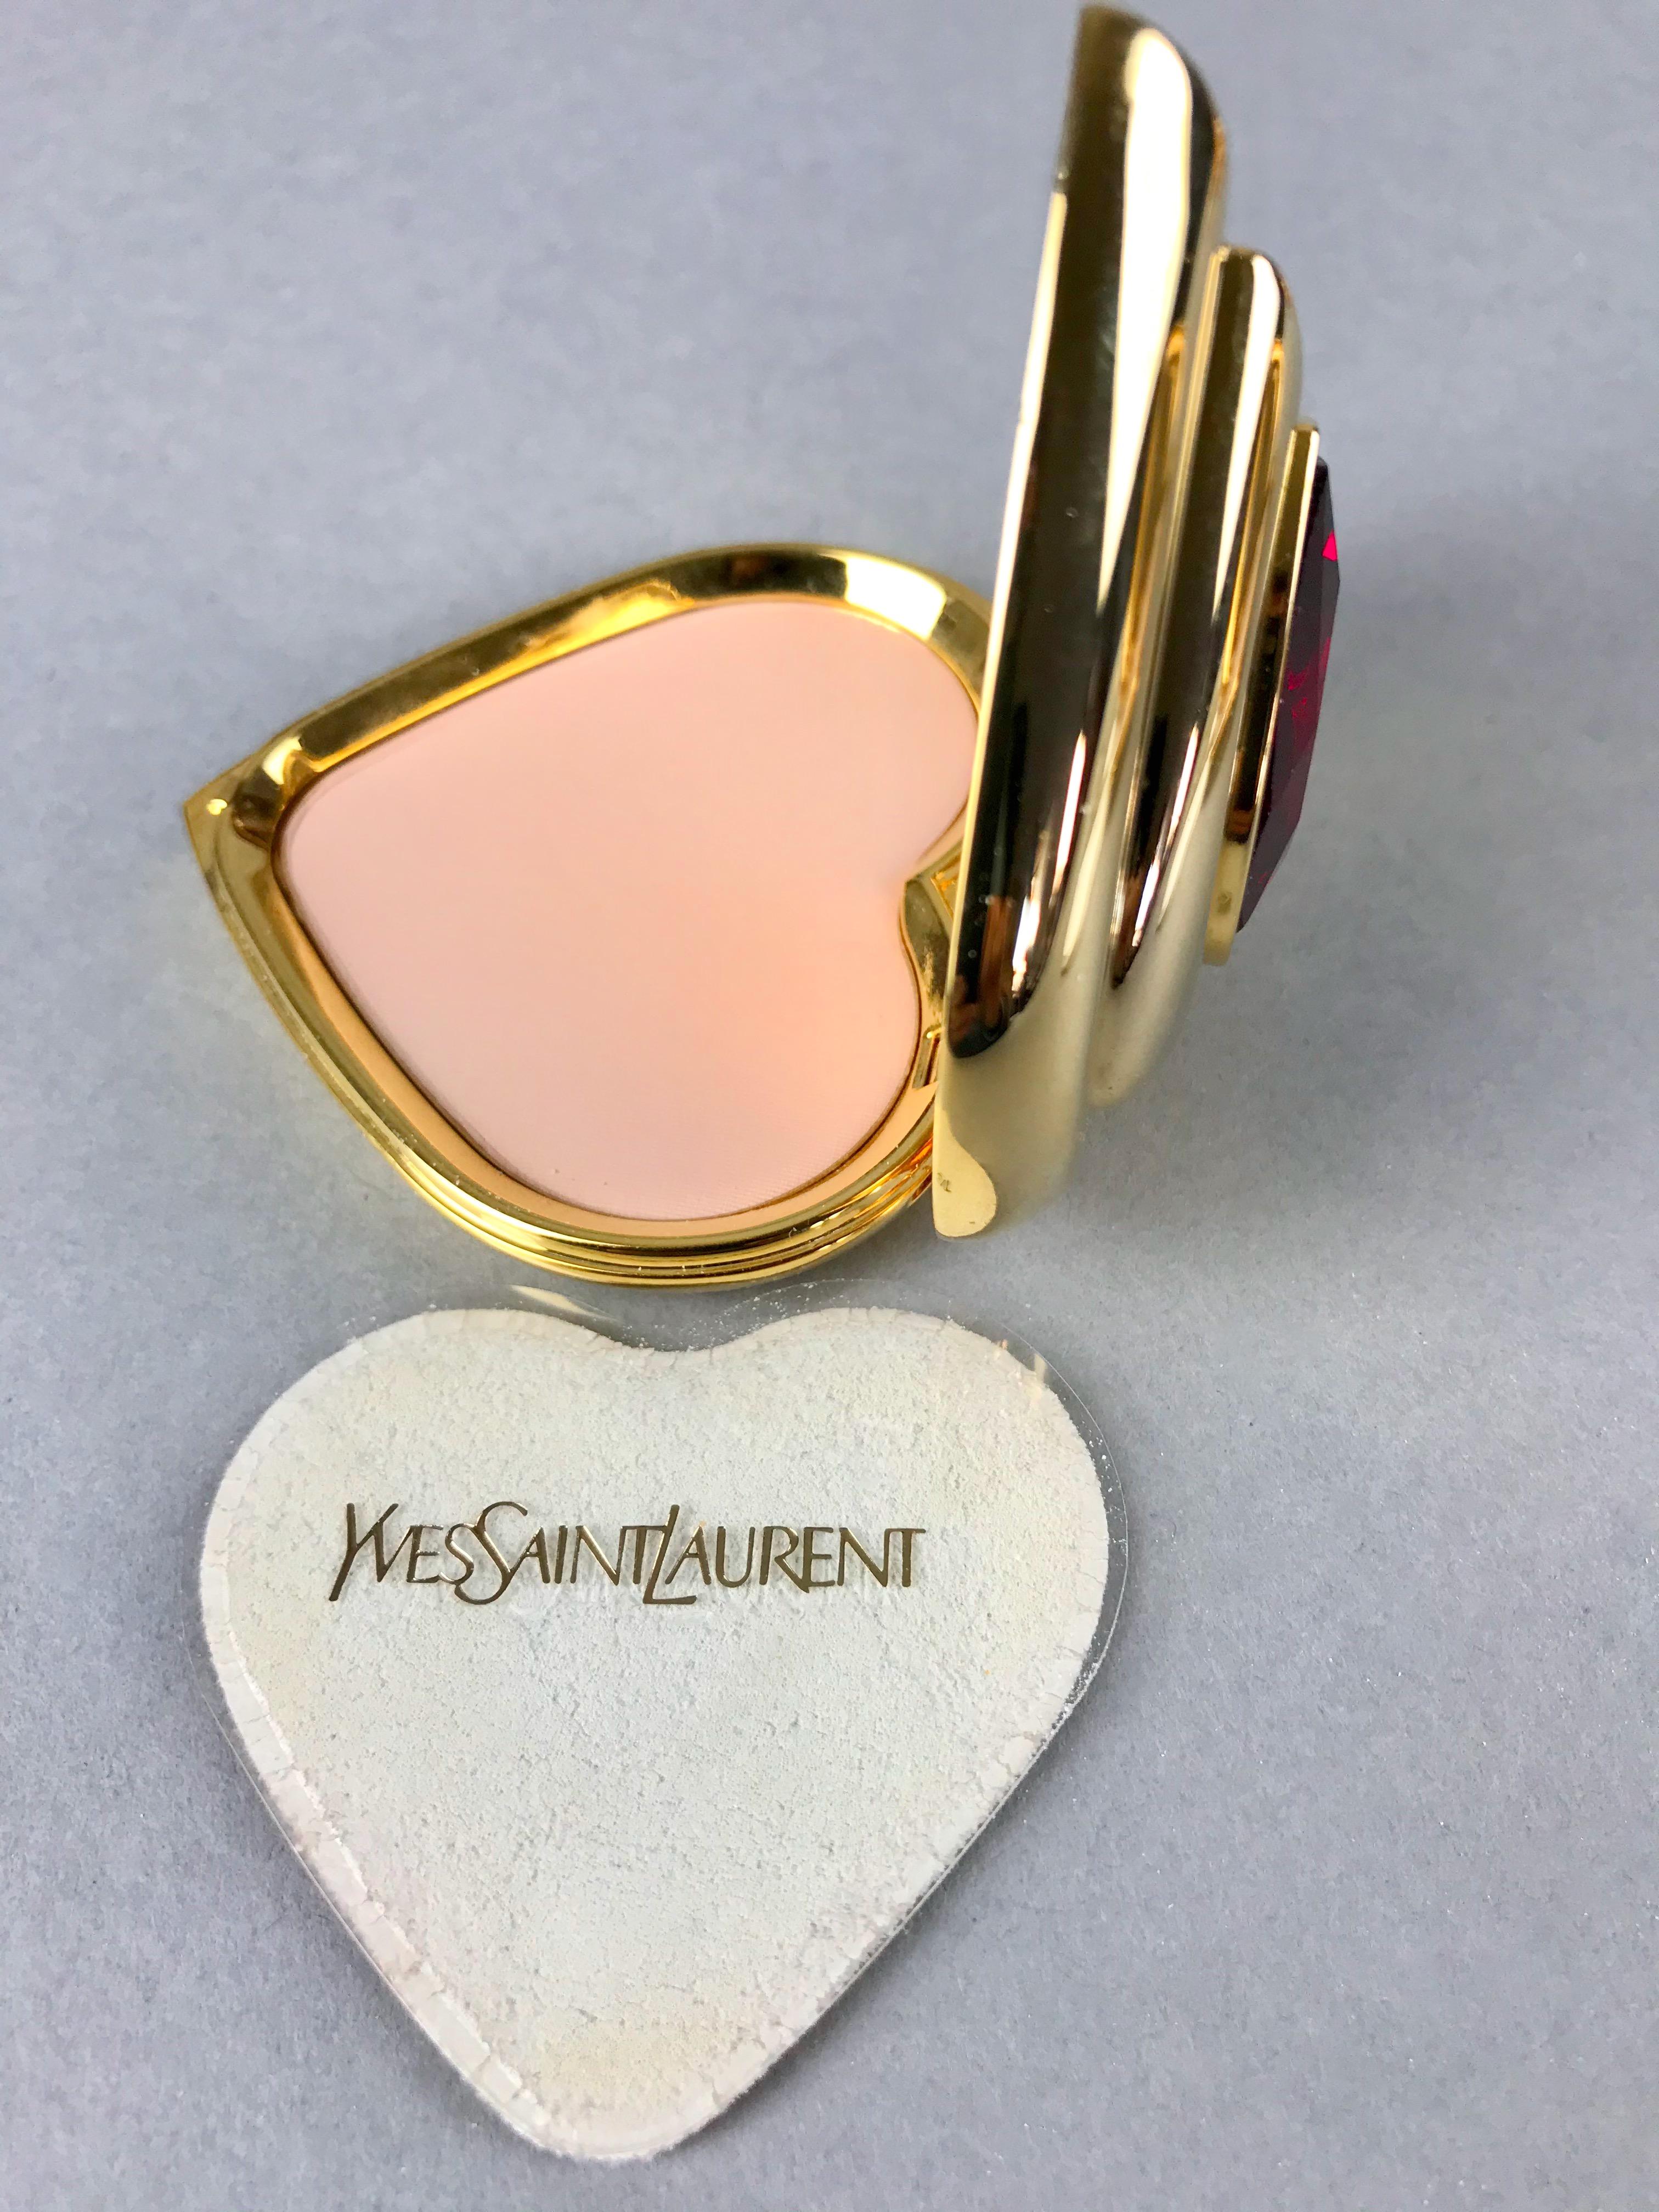 Vintage YVES SAINT LAURENT by Robert Goossens Red Heart Jewelled Compact Powder For Sale 2